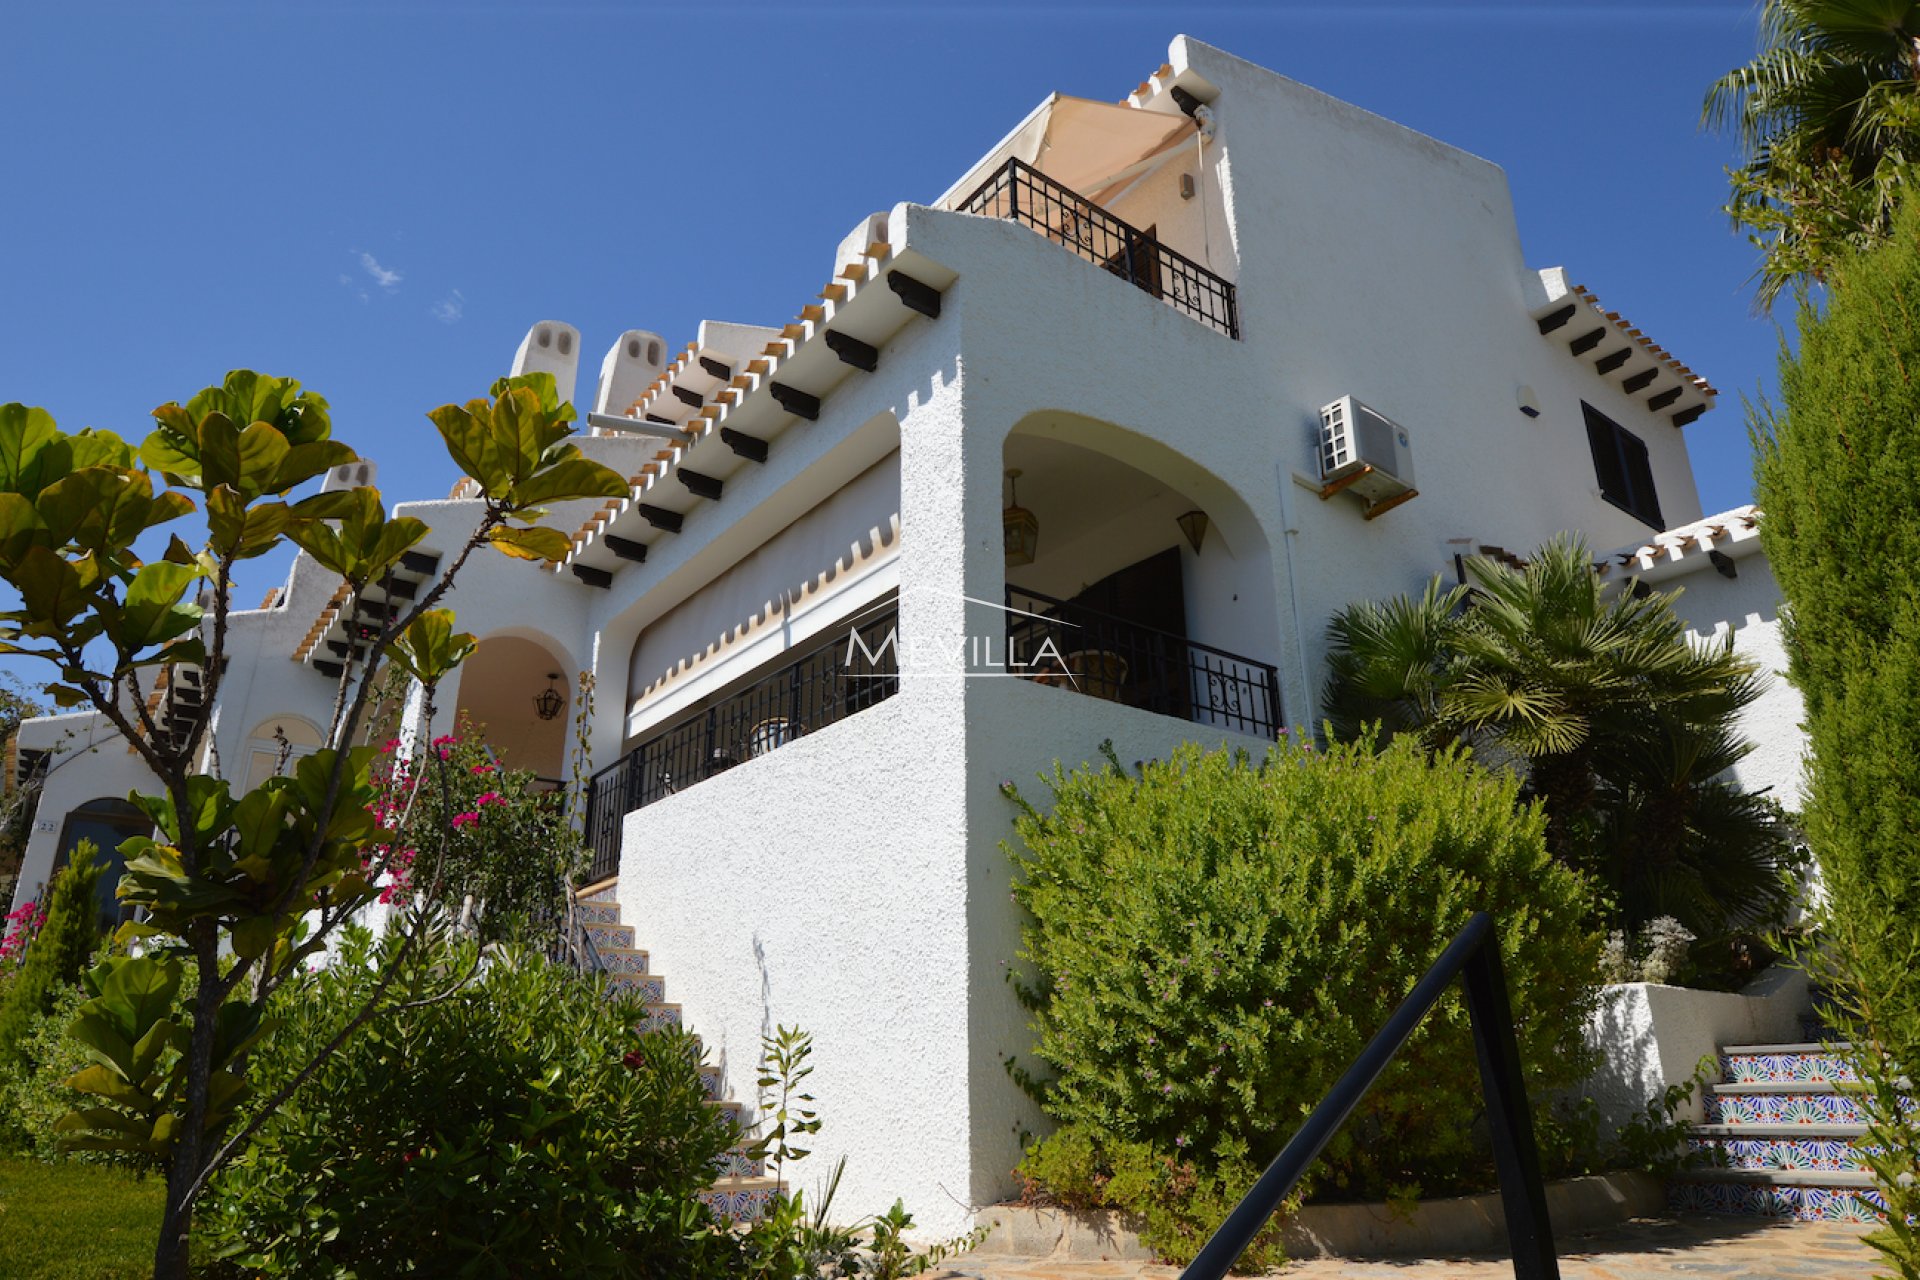 Townhouse for sale in Cabo Roig, Orihuela Costa.